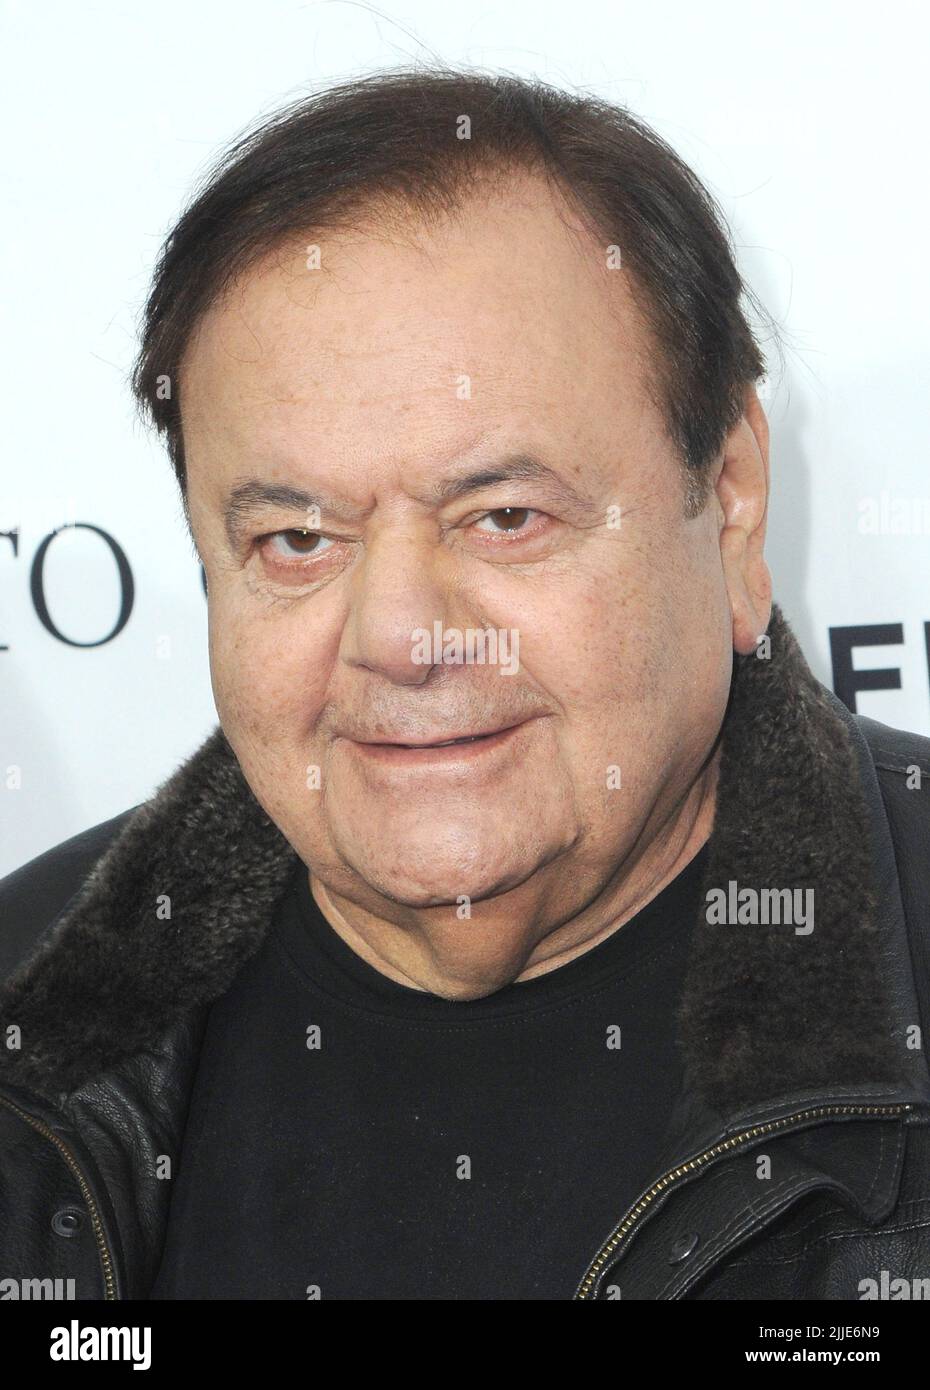 **fFILE PHOTO** Paul Sorvino Has Passed Away. New York, NY- April 25: Paul Sorvino attends the closing night screening of 'Goodfellas' during the 2015 Tribeca Film Festival on April 25, 2015 at the Beacon Theater in New York City. Credit: John Palmer/MediaPunch Stock Photo